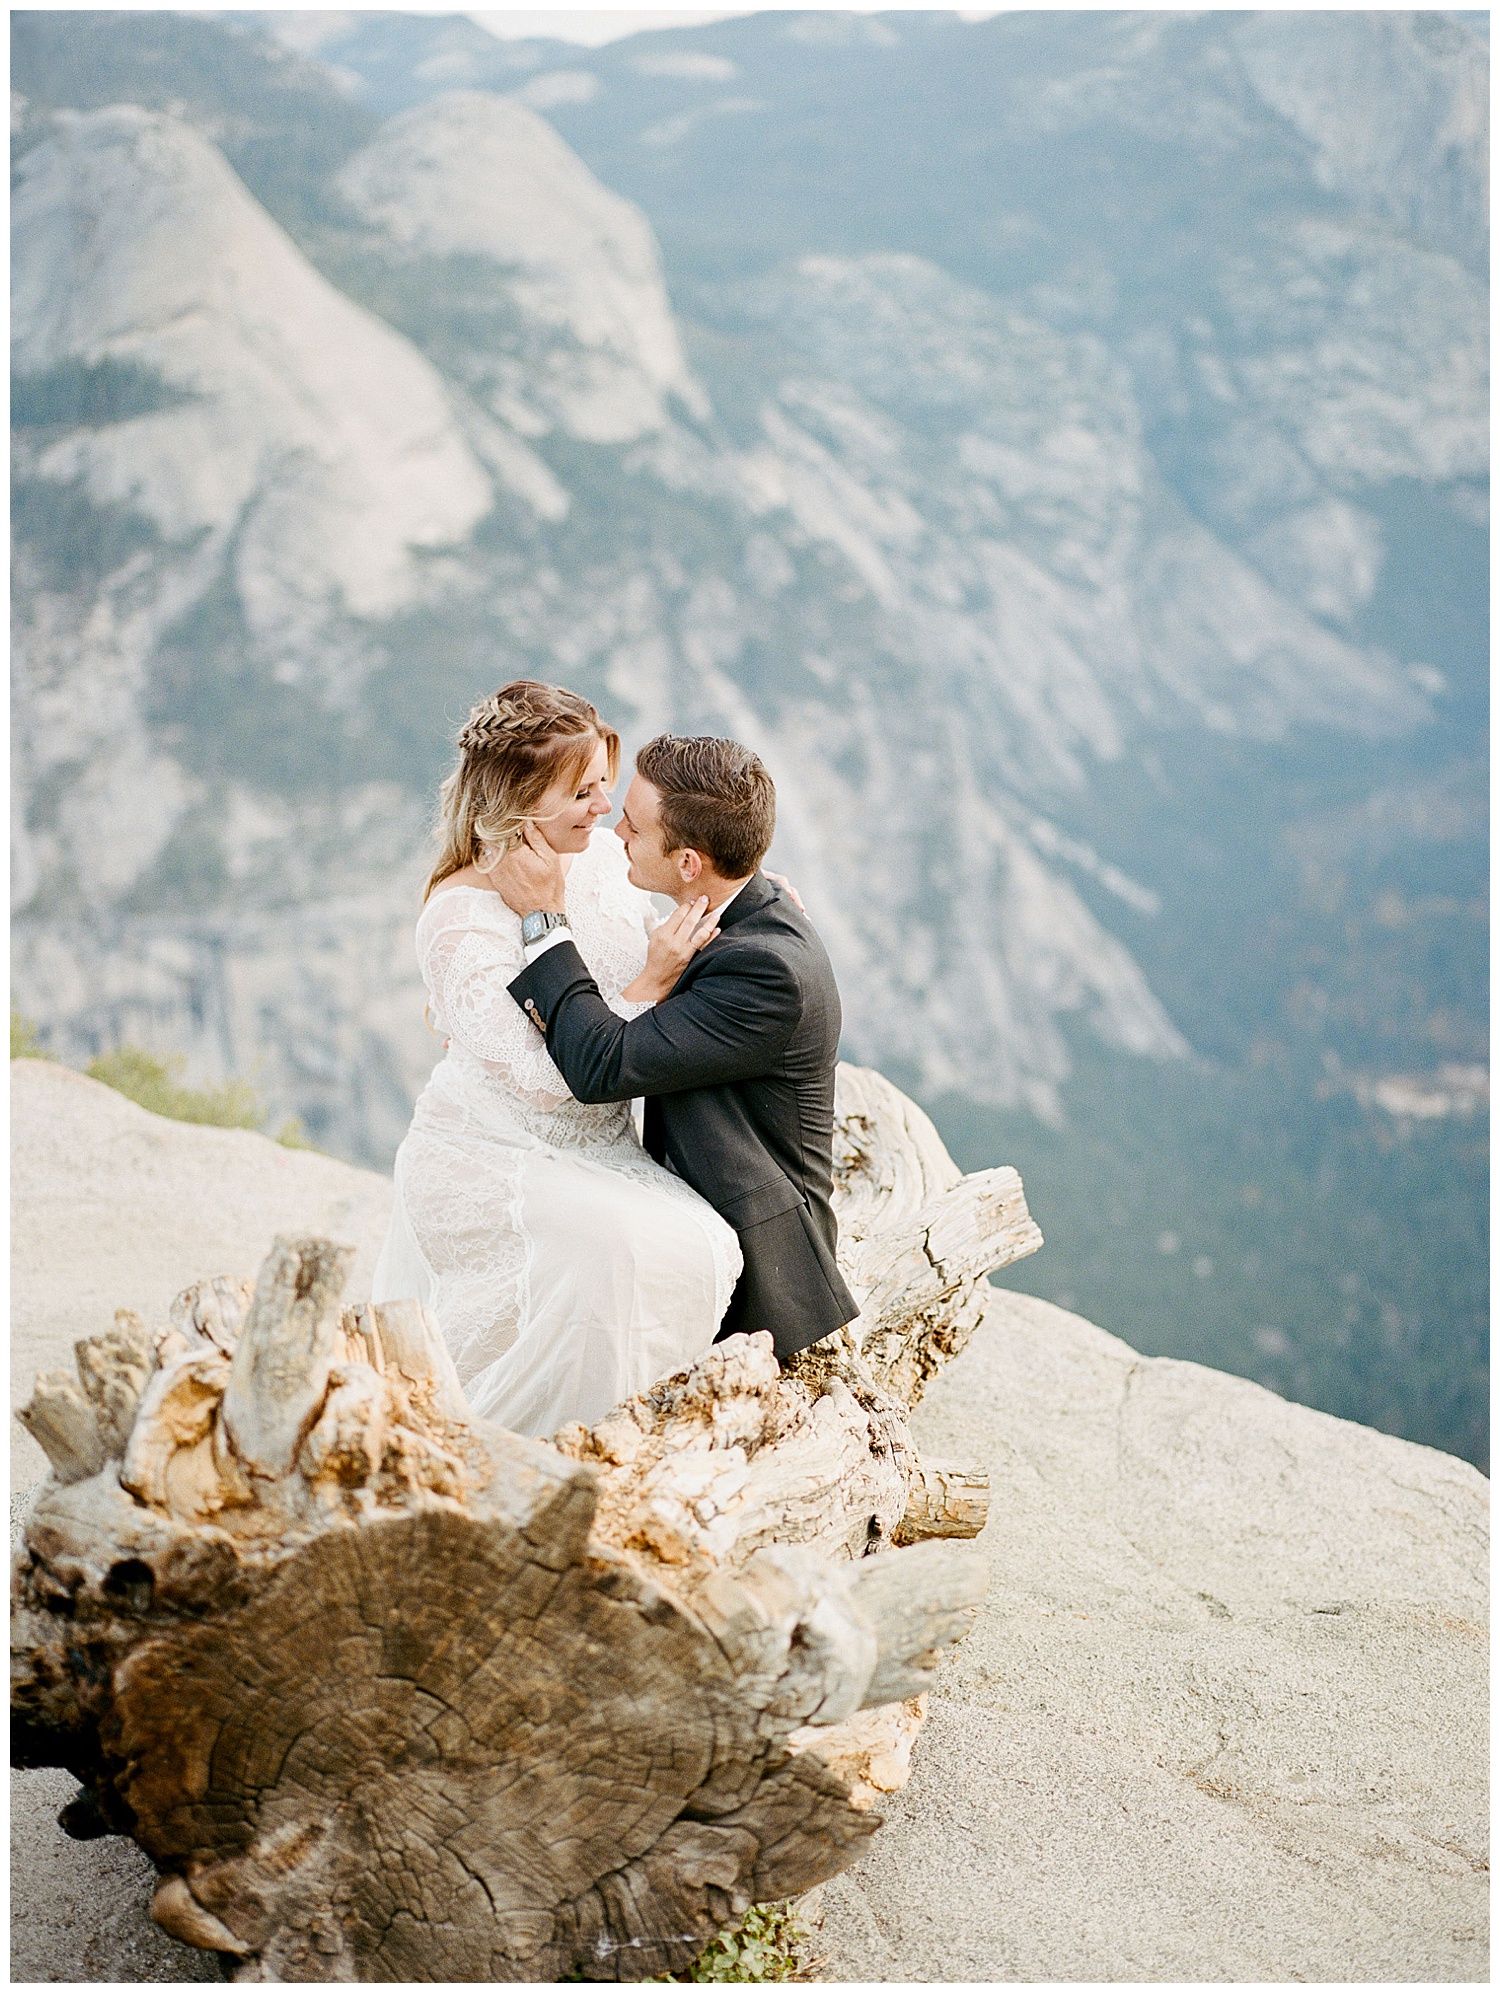 san francisco wedding photographer photographing a styled anniversary session in yosemite national park at sunrise using only medium format film and mamiya 645 afd